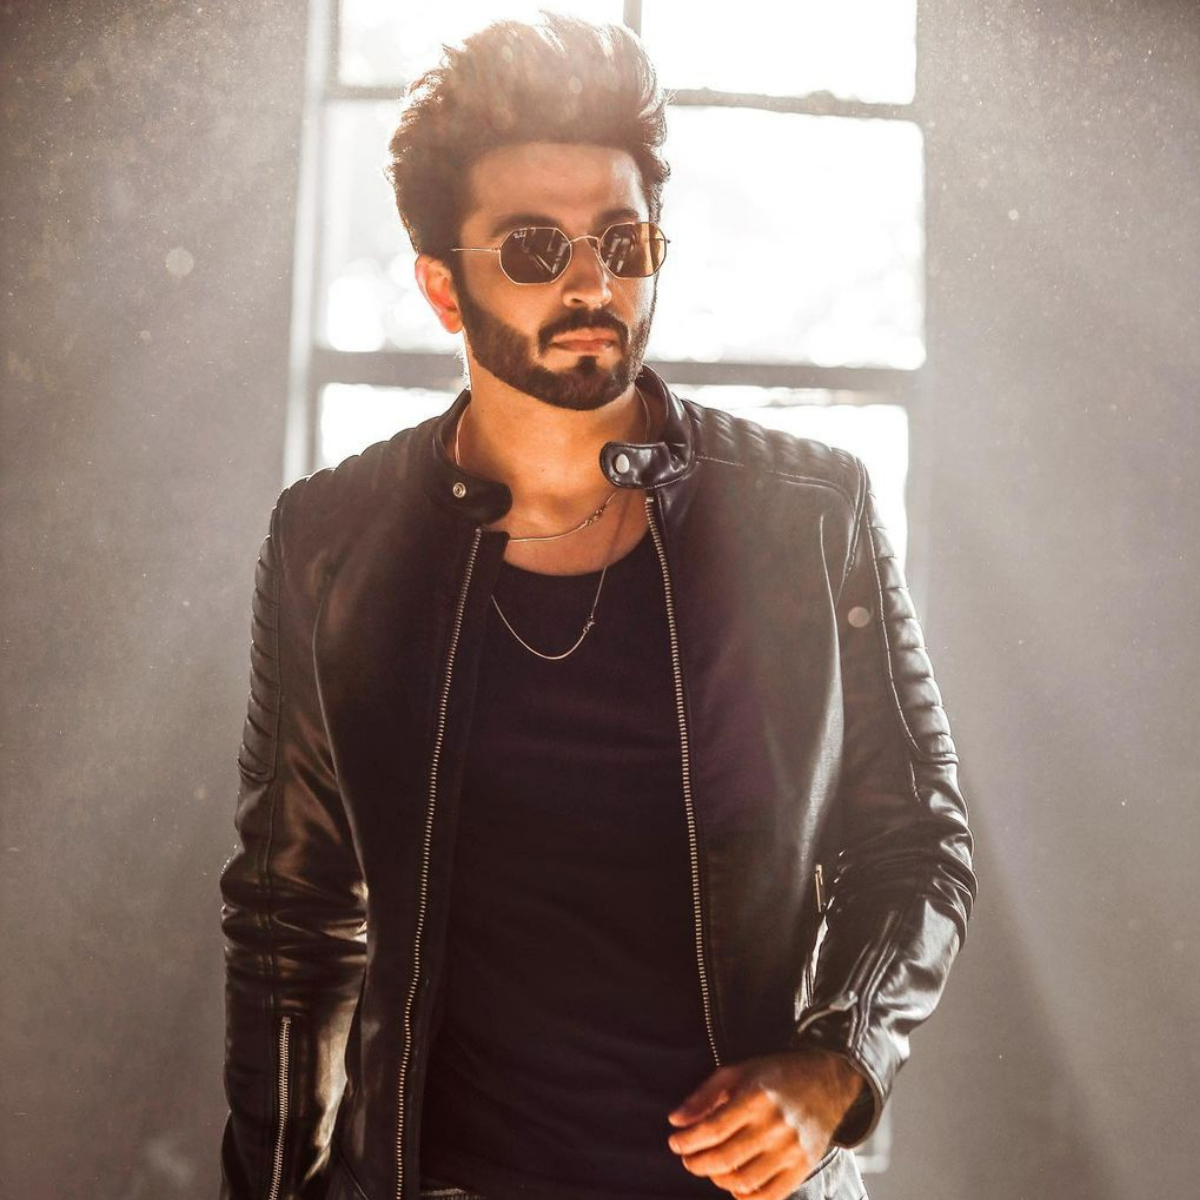 EXCLUSIVE: Dheeraj Dhoopar: Got new show's offer after quitting Kundali Bhagya, it happened at the right time